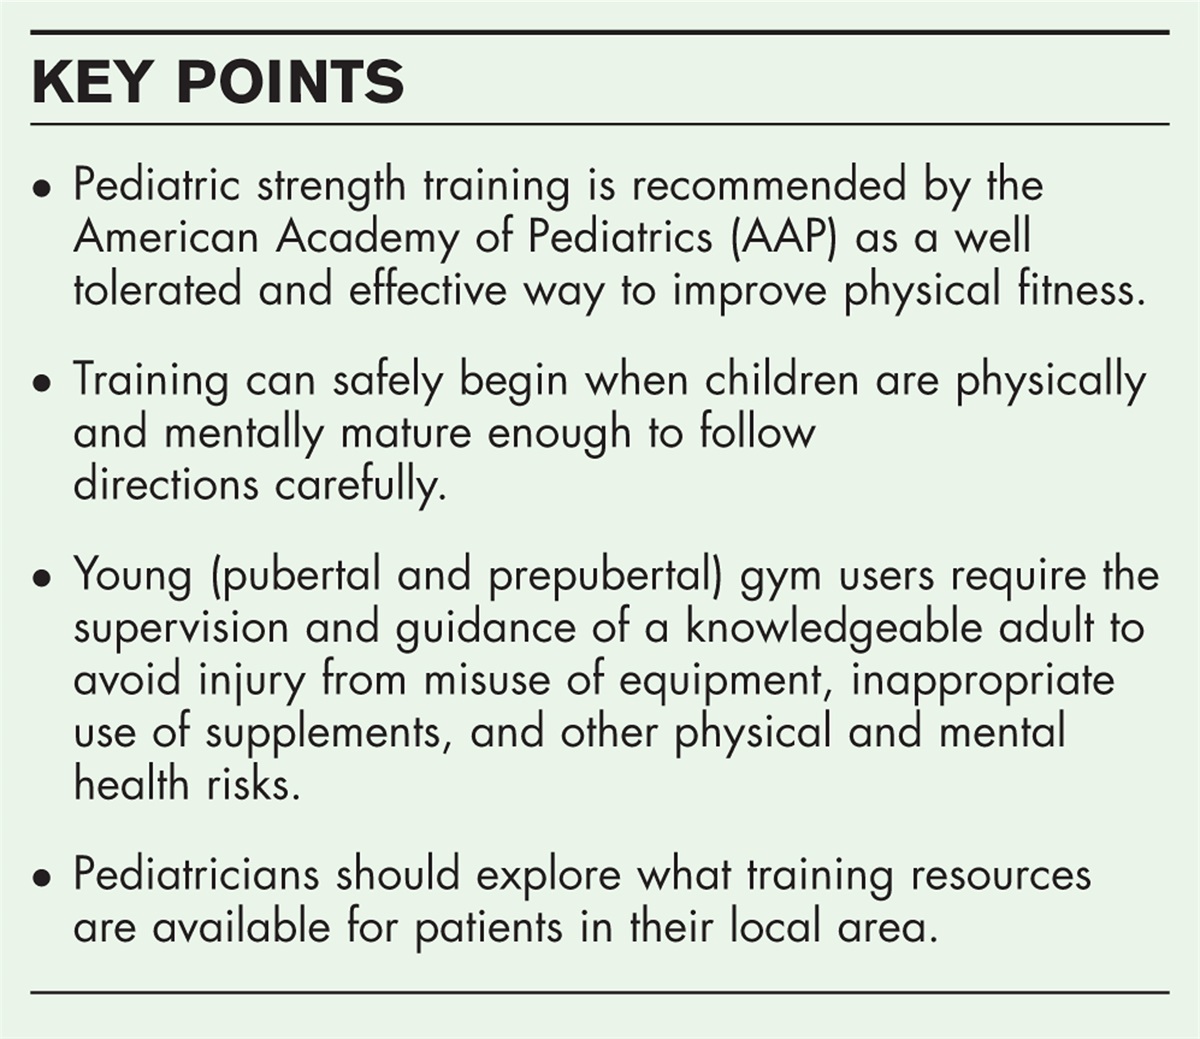 Pediatric strength training: benefits, concerns, and current trends